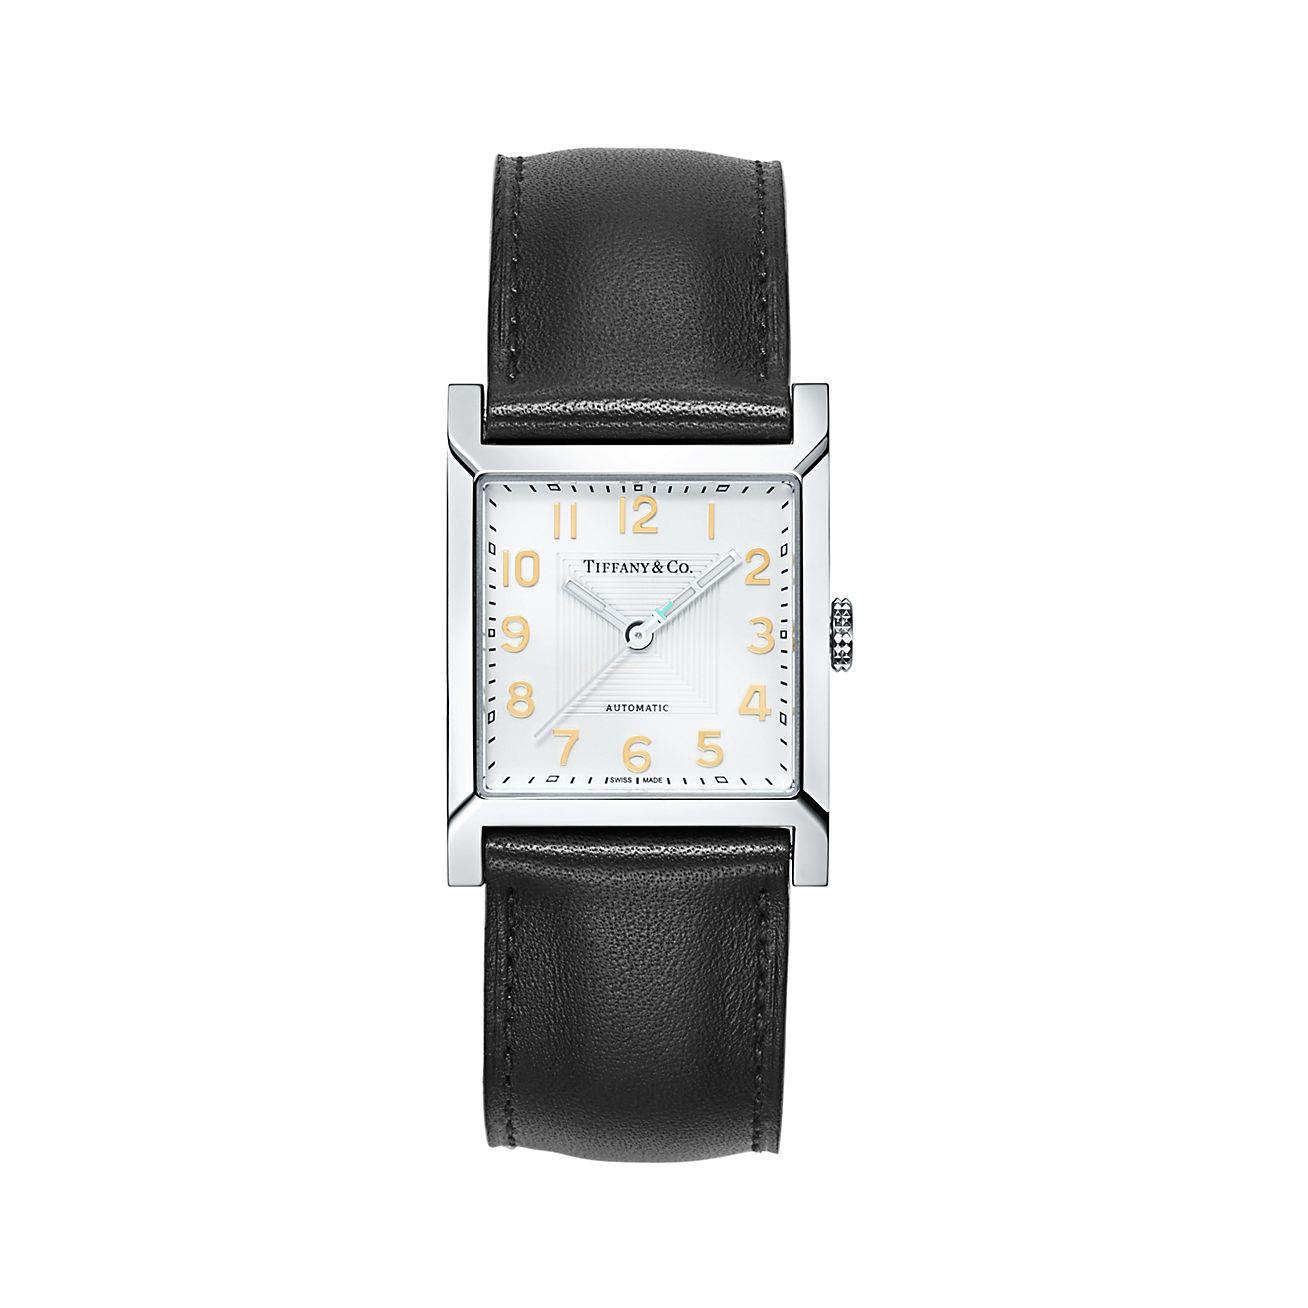 Tiffany 1837 Makers 27 mm square watch in stainless steel with a leather  strap.